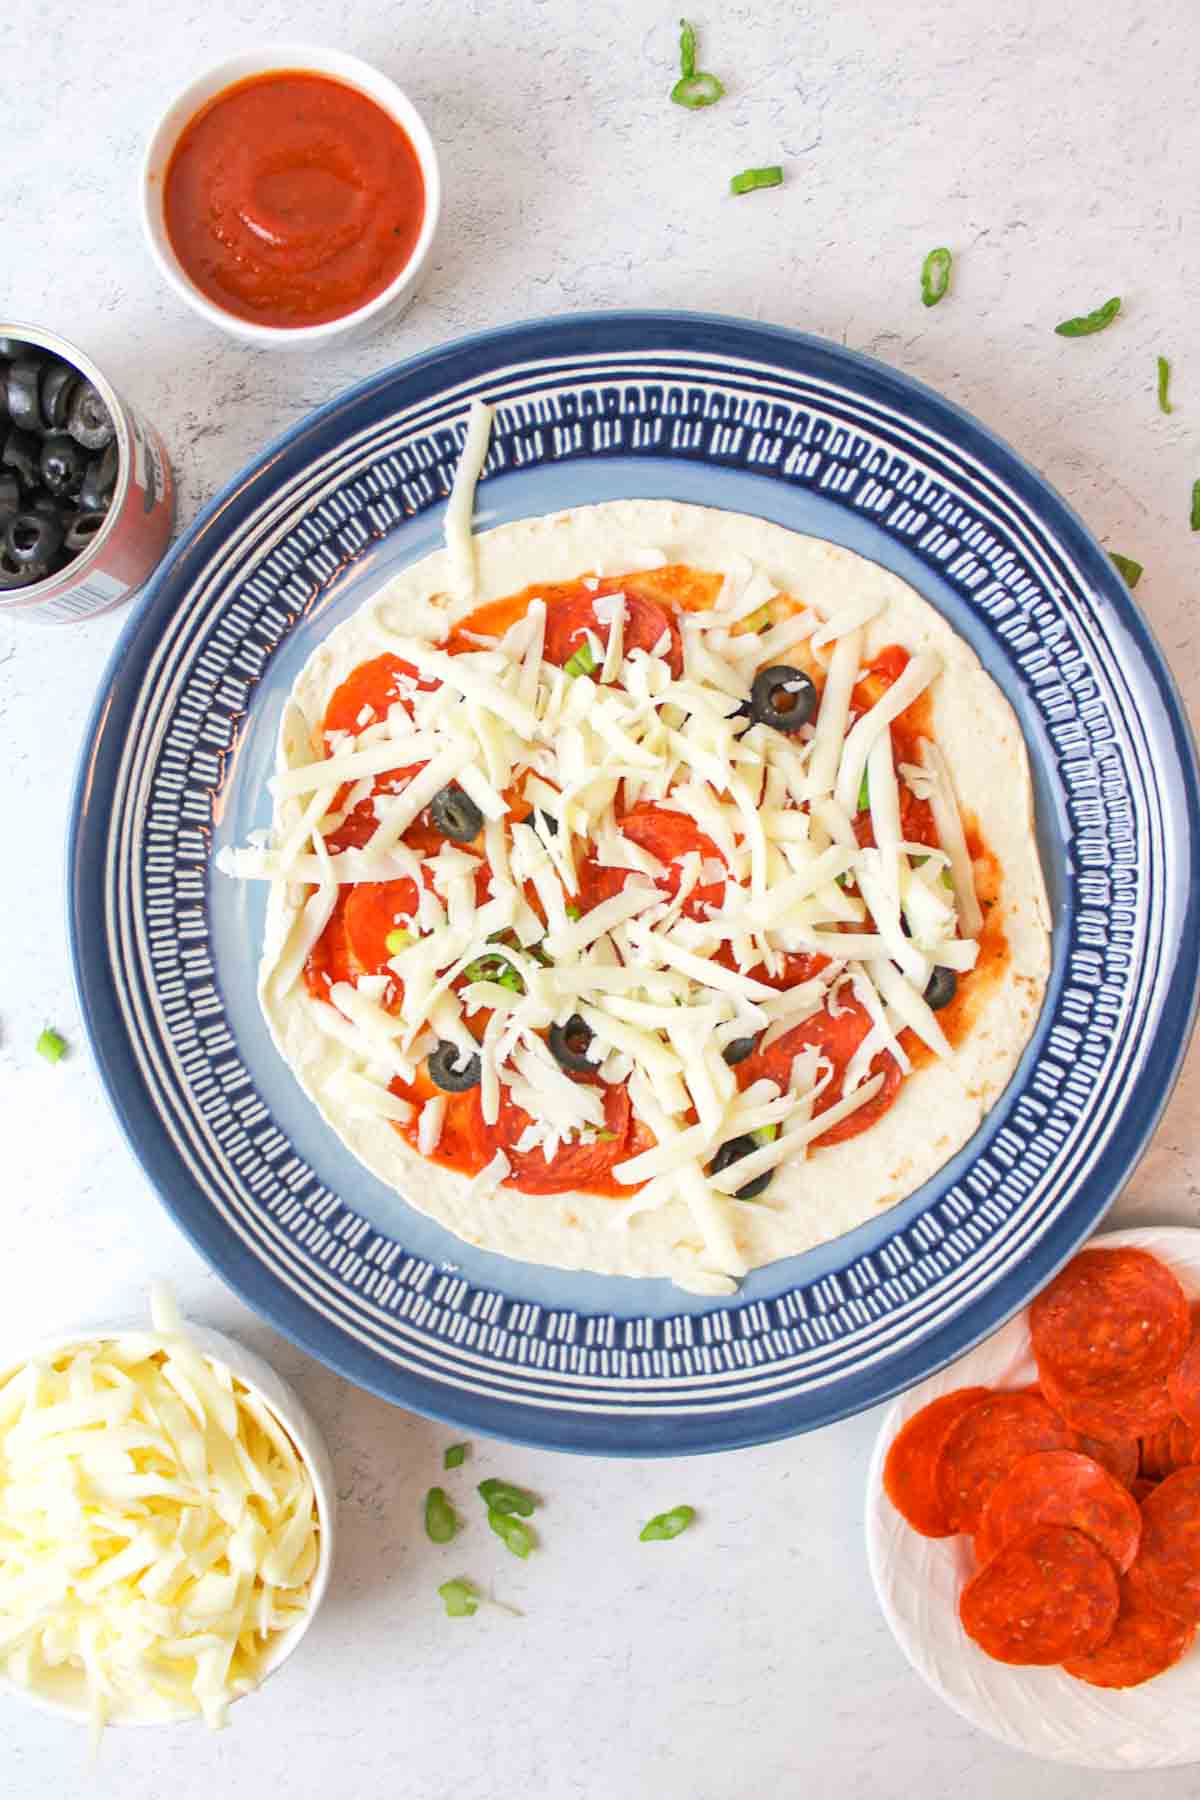 a tortilla pizza with sauce and toppings under shredded cheese on a blue plate.